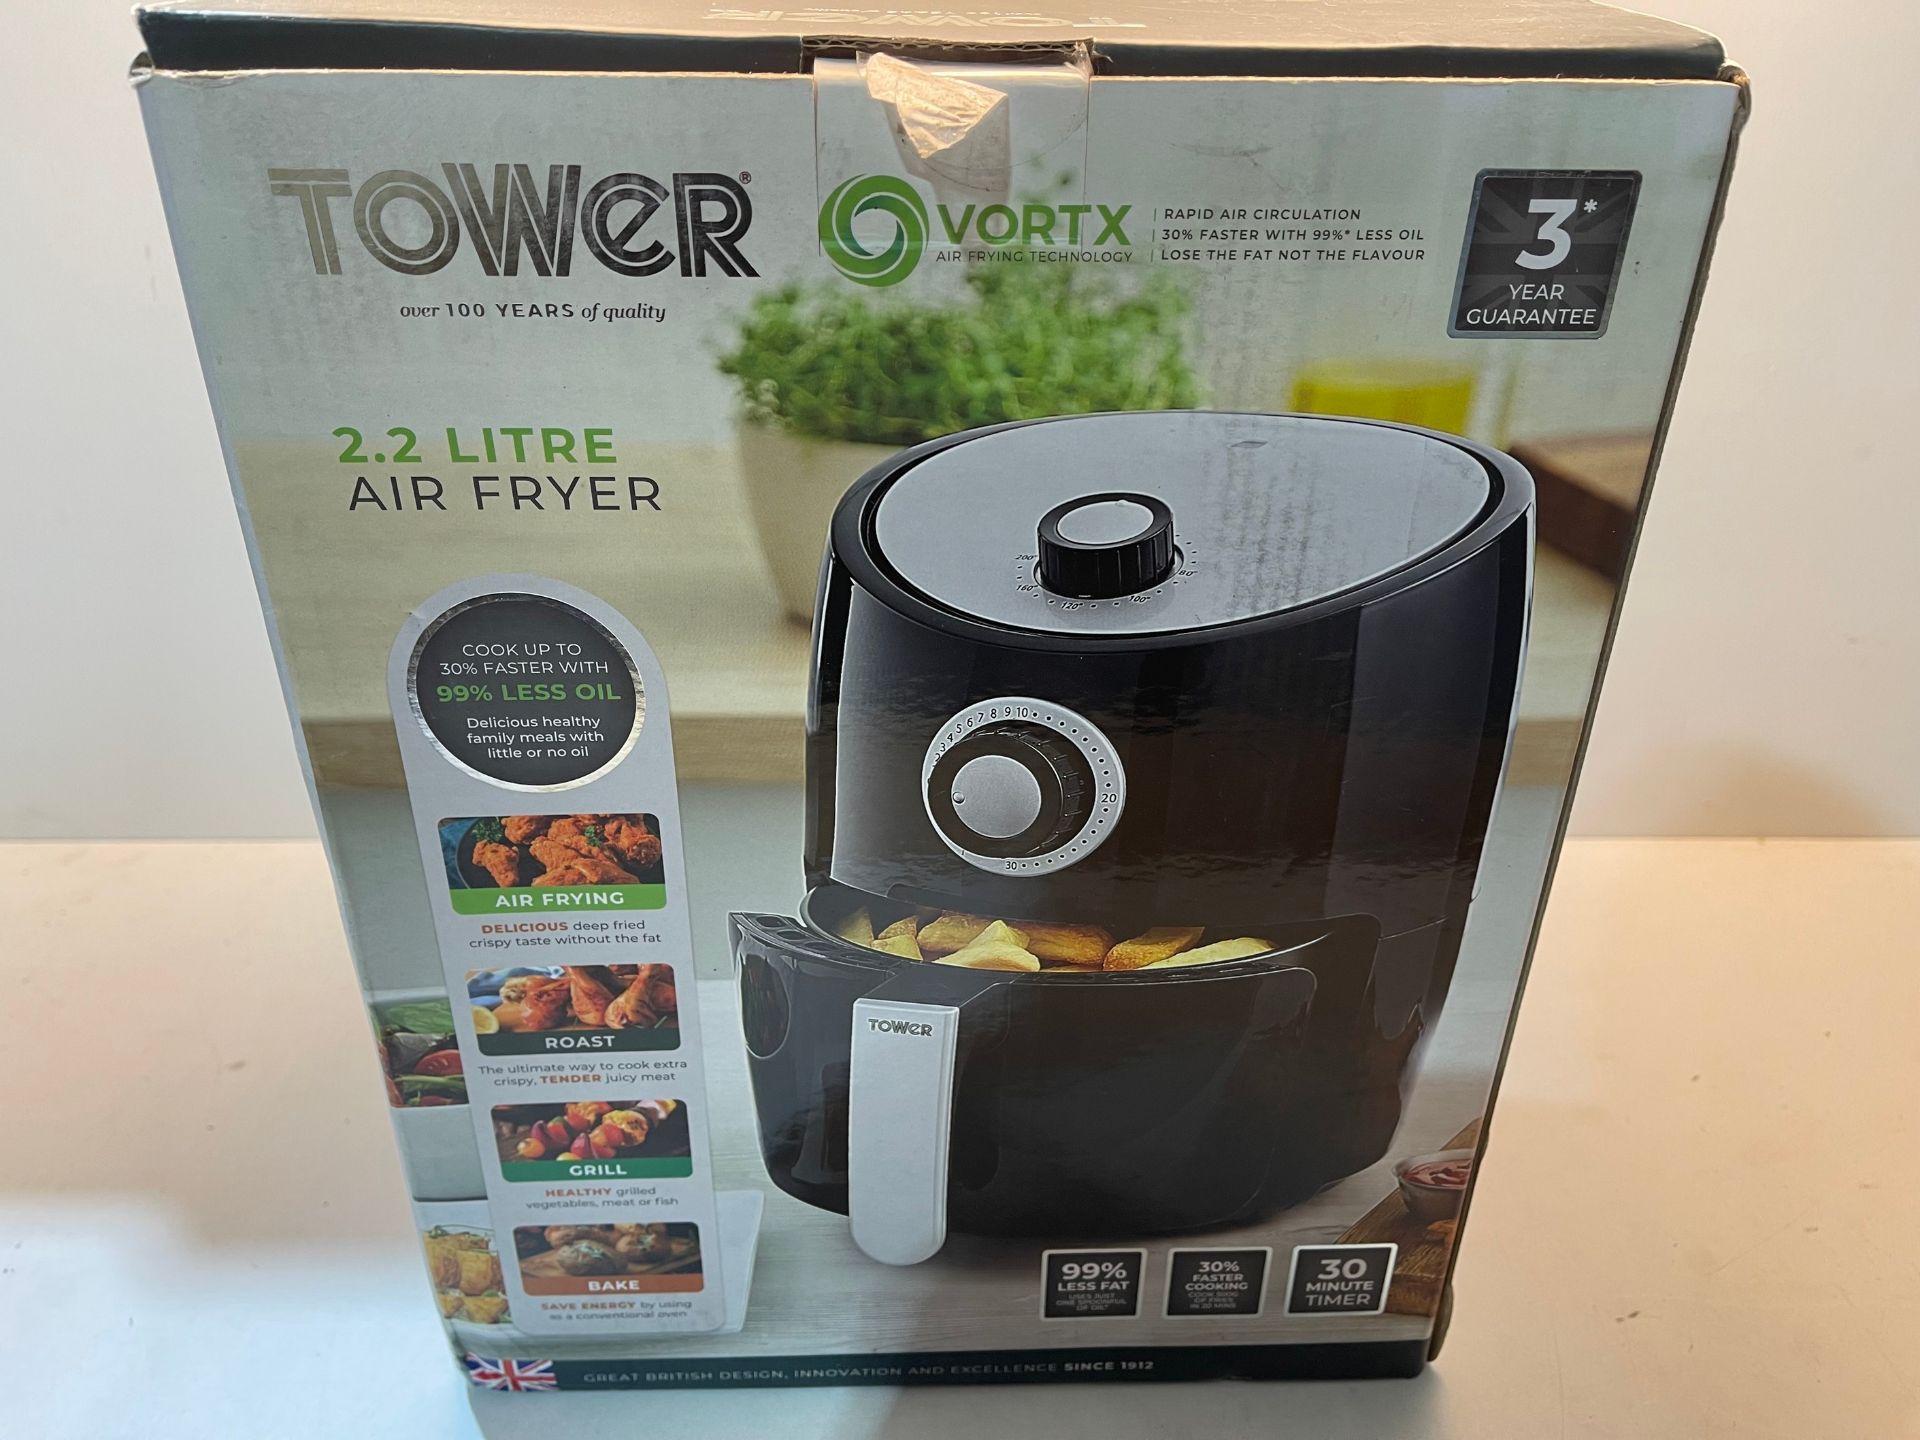 Tower T17023 Air Fryer Oven with Rapid Air Circulation and 30 Min Timer, 2.2 Litre, Black Â£44. - Image 2 of 2